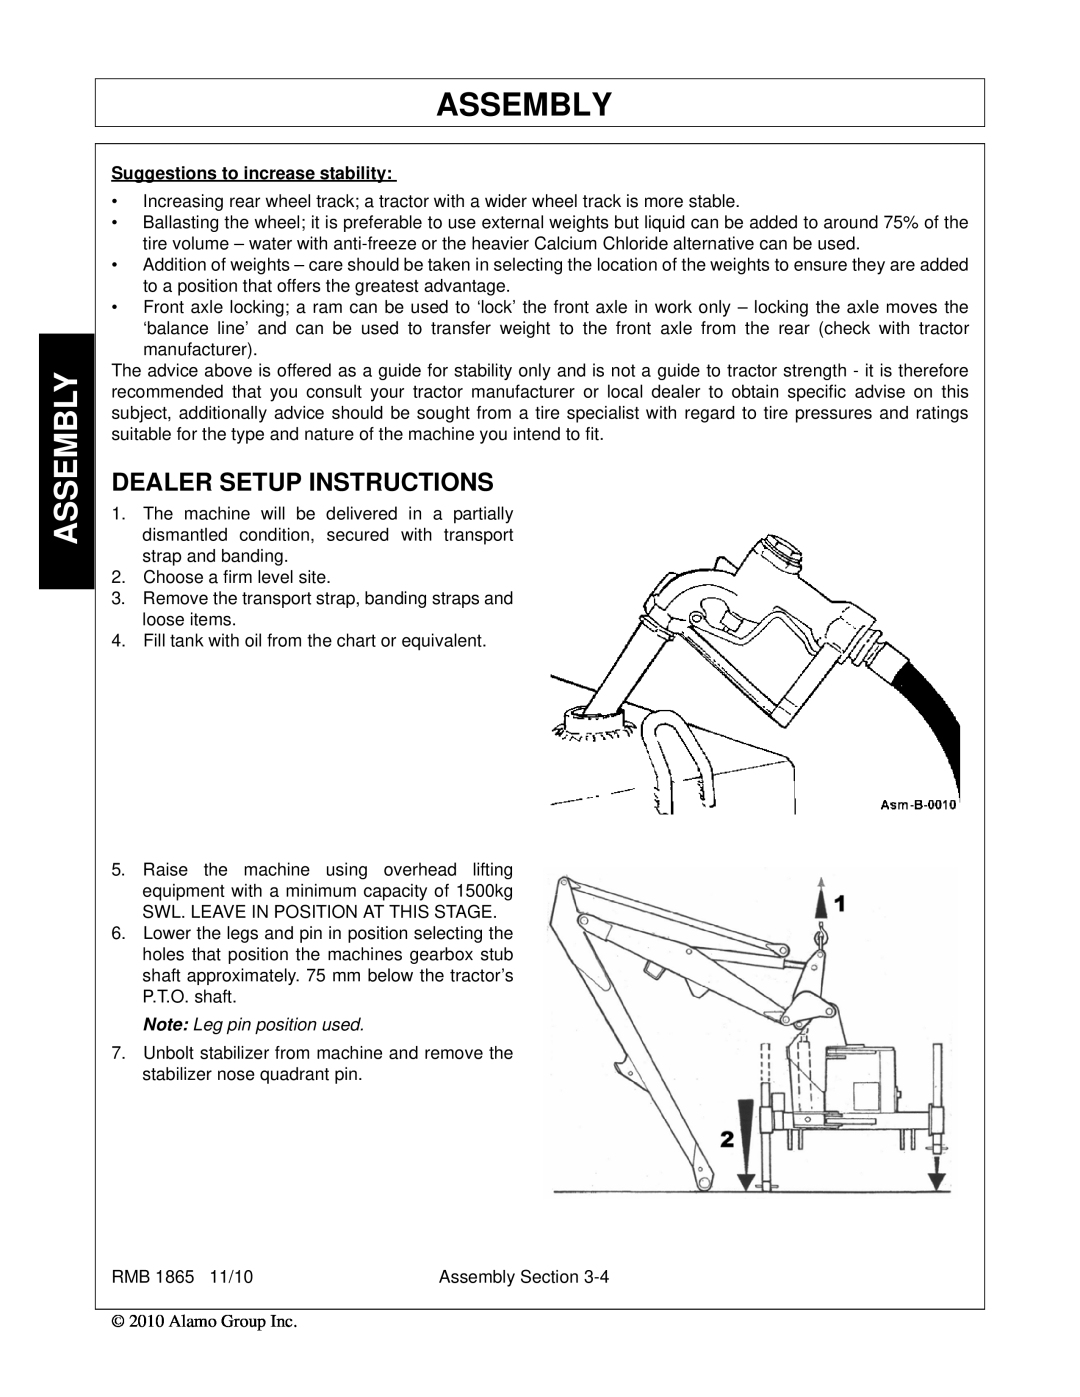 Bush Hog RMB 1865 manual Assembly, Dealer Setup Instructions, Suggestions to increase stability 